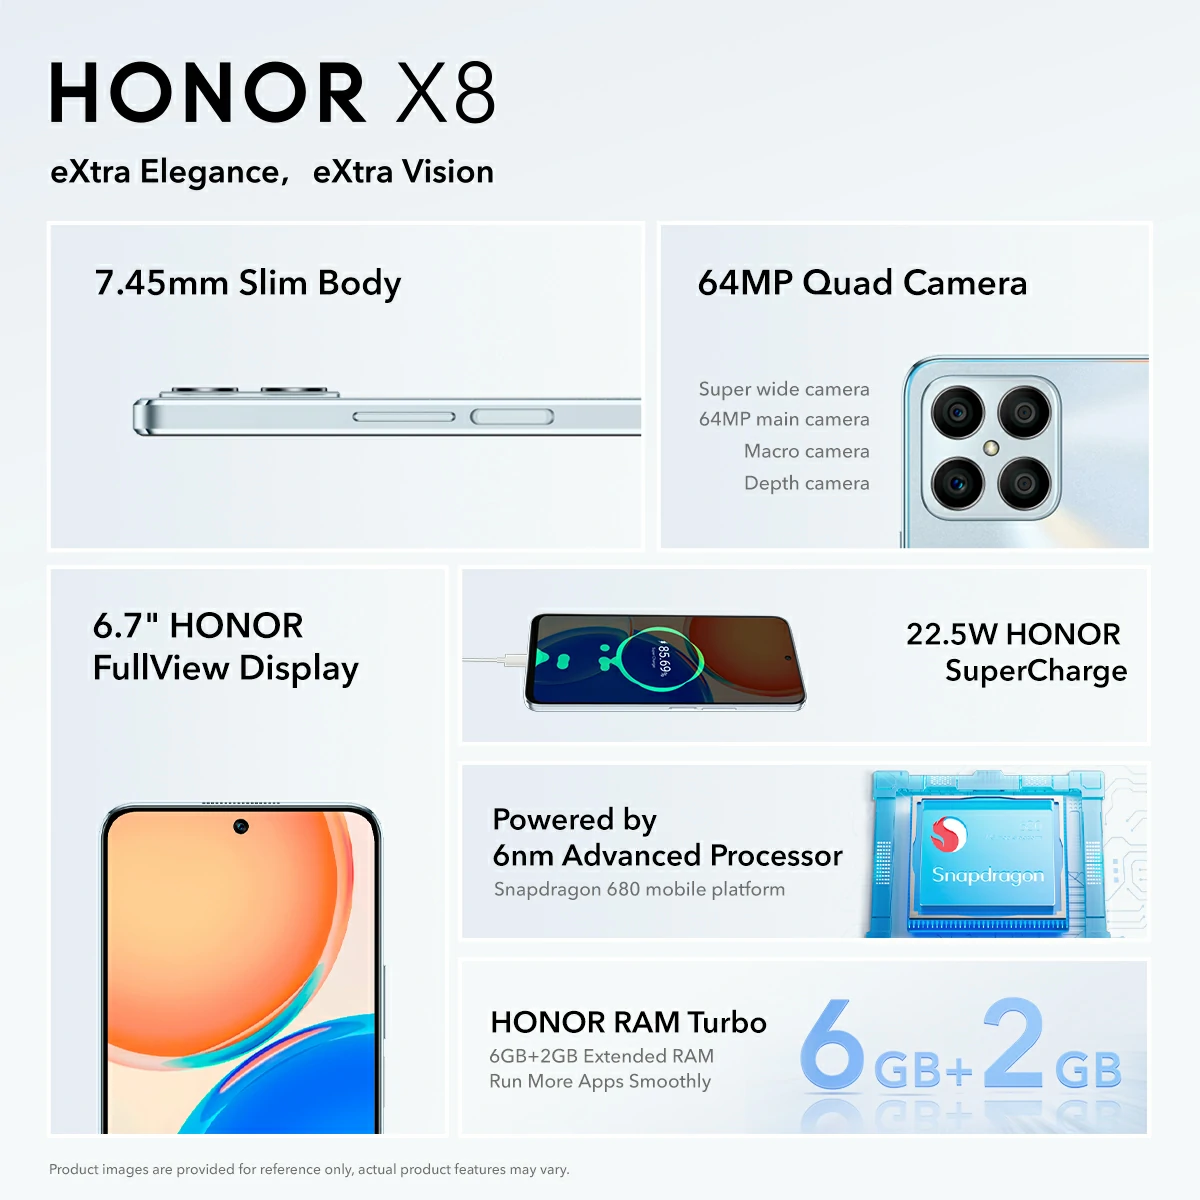 HONOR X8 Series coming with compact design, Fullview display, power efficient Snapdragon Soc and 22.5W HONOR SuperCharge.